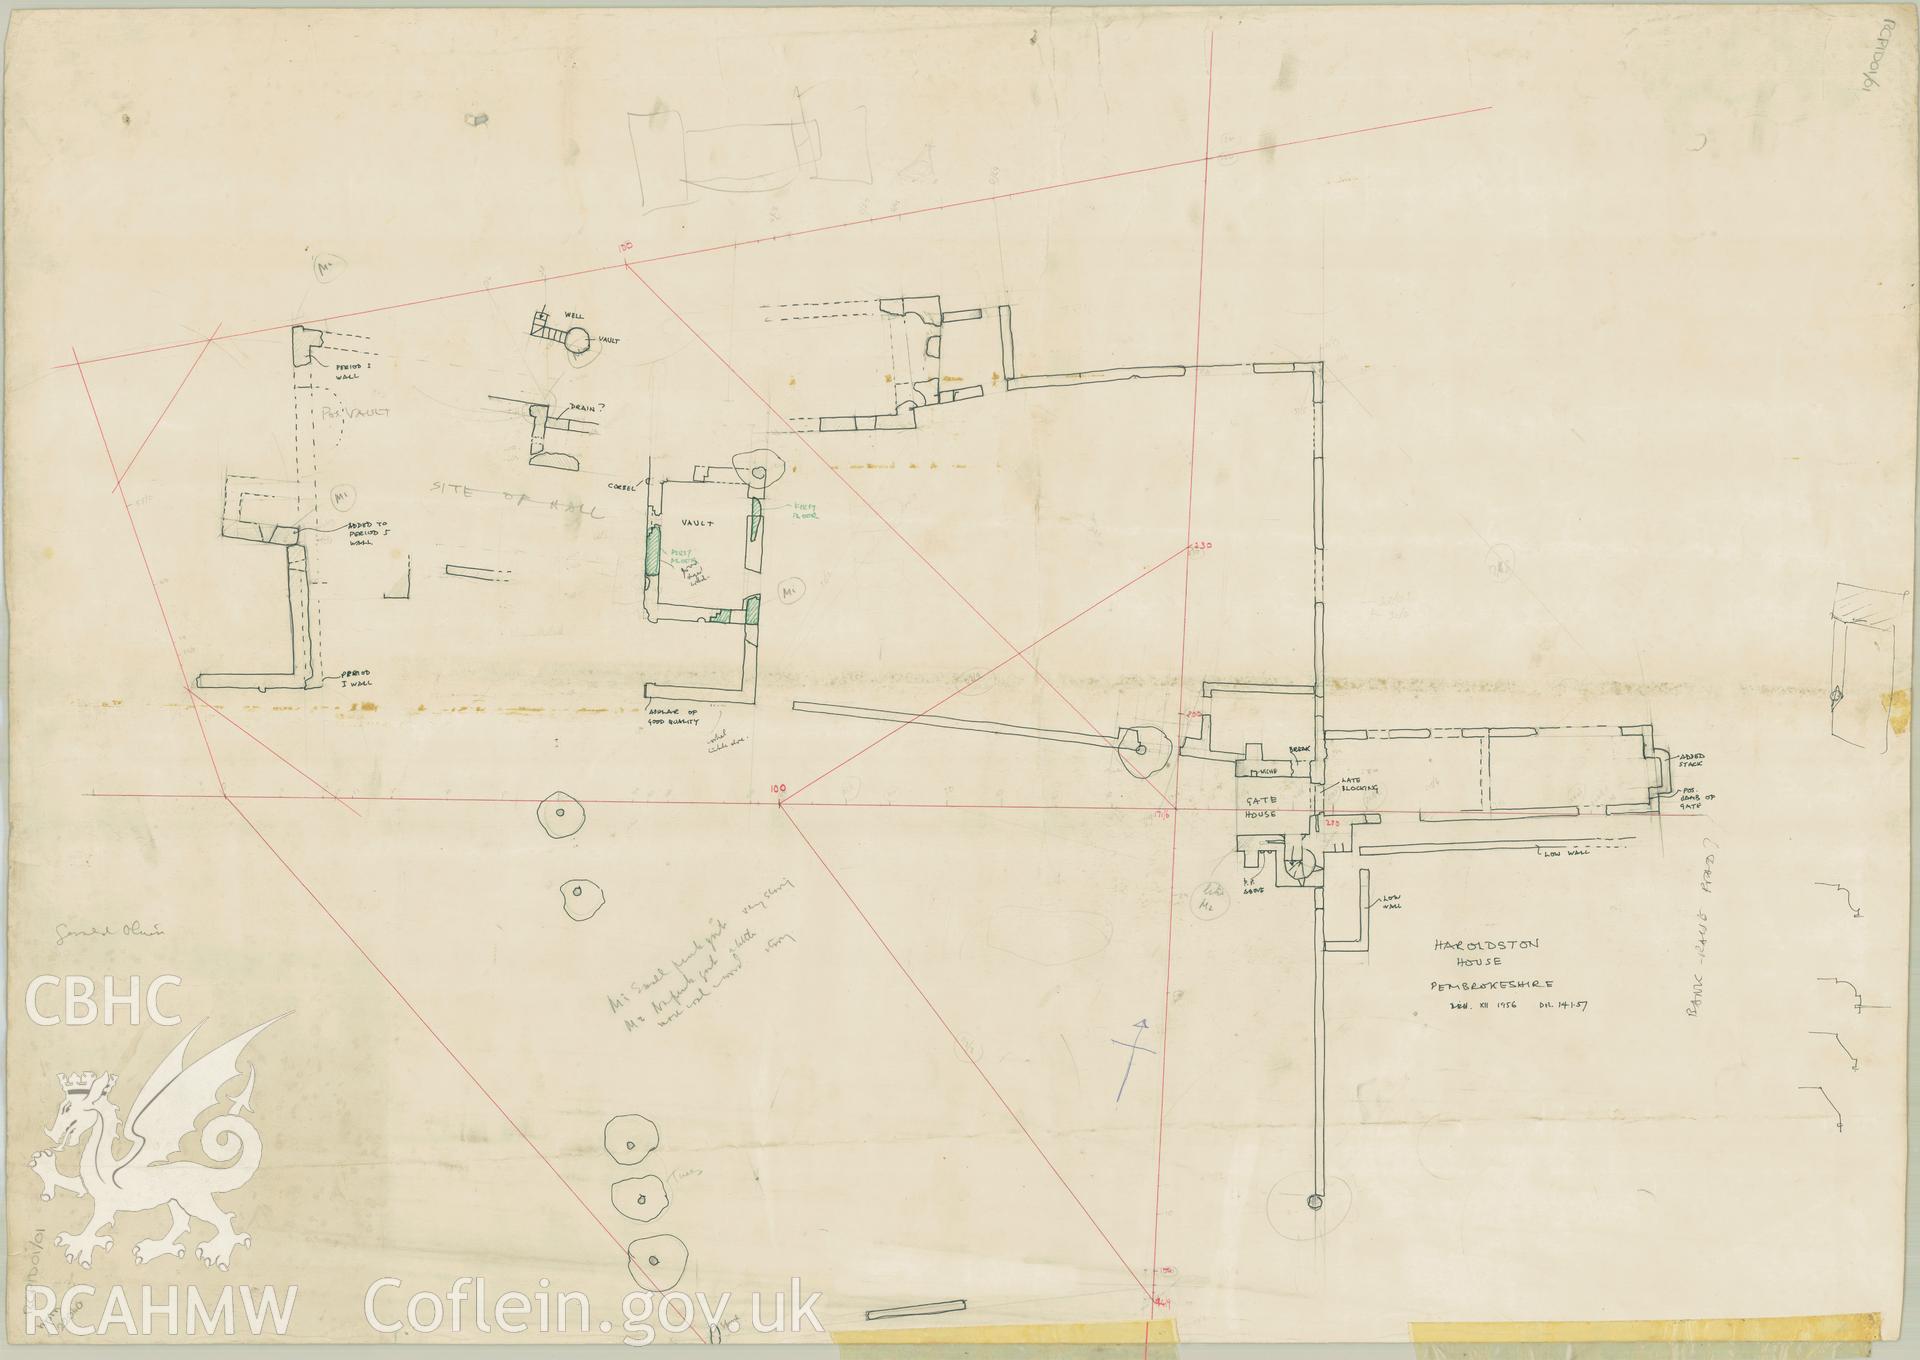 Haroldstone House, Pembrokeshire; Incomplete plan with annotations produced by Douglas Hague, December 1956